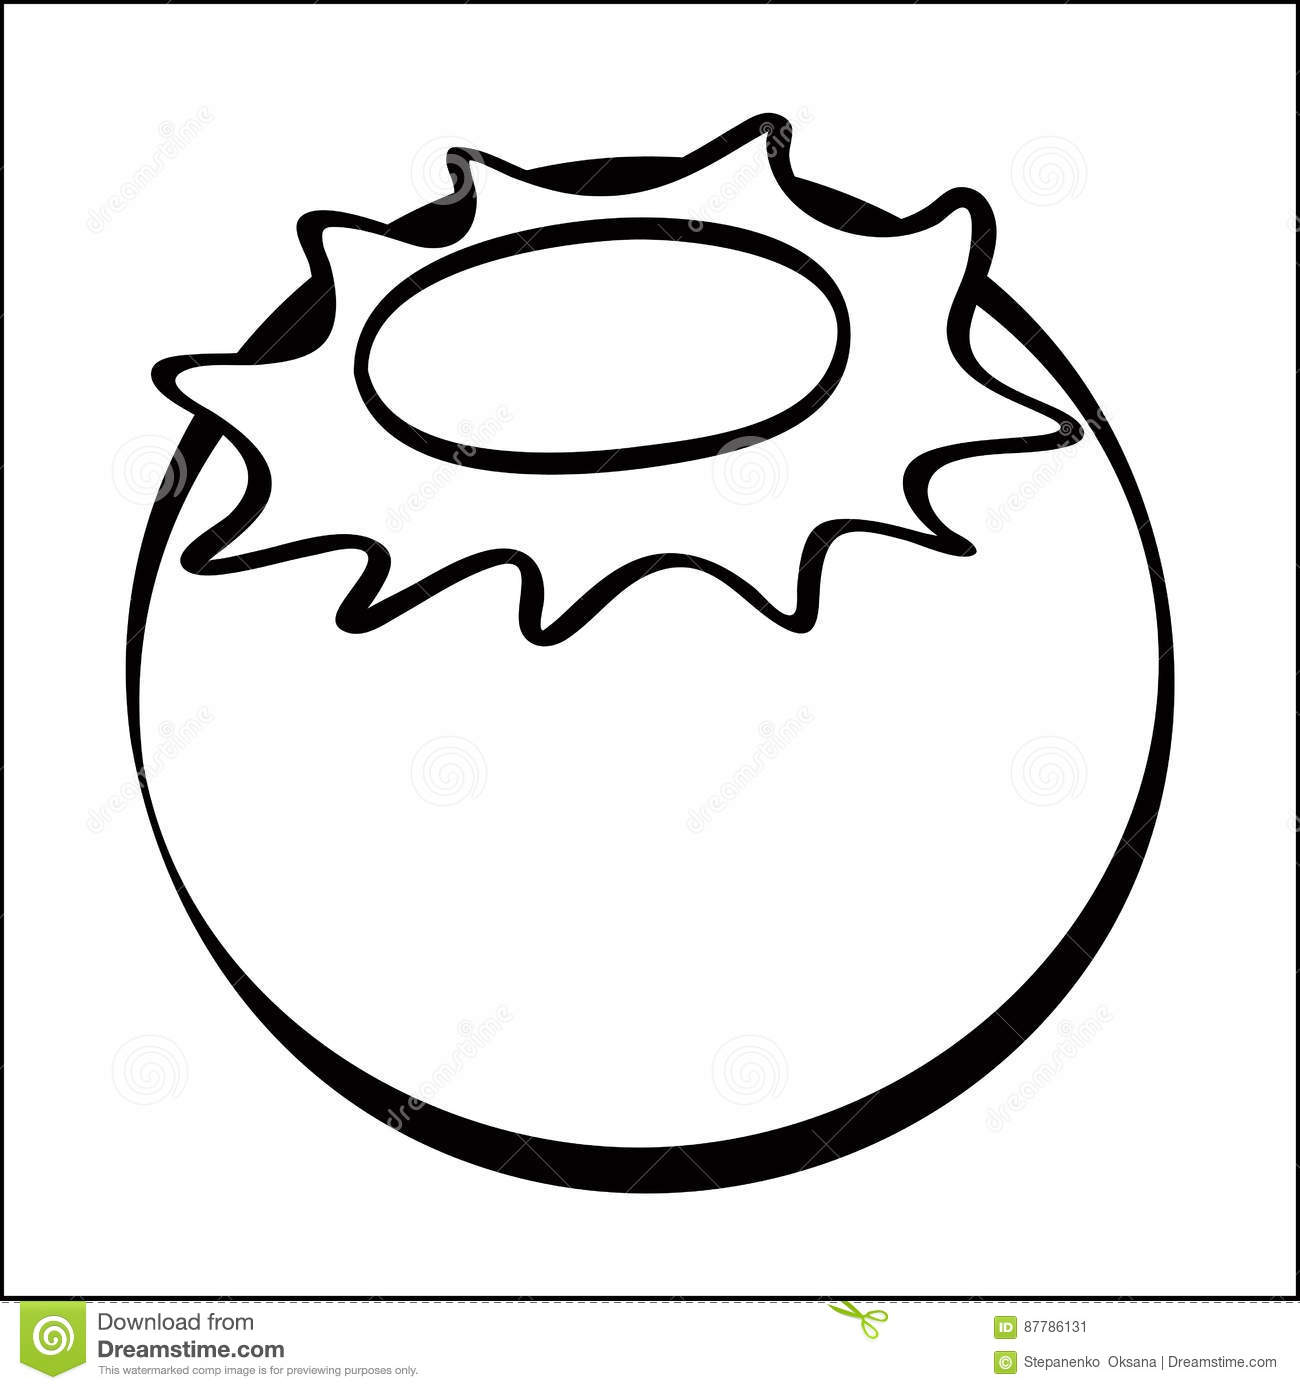 Blueberry clipart outline. Black and white free